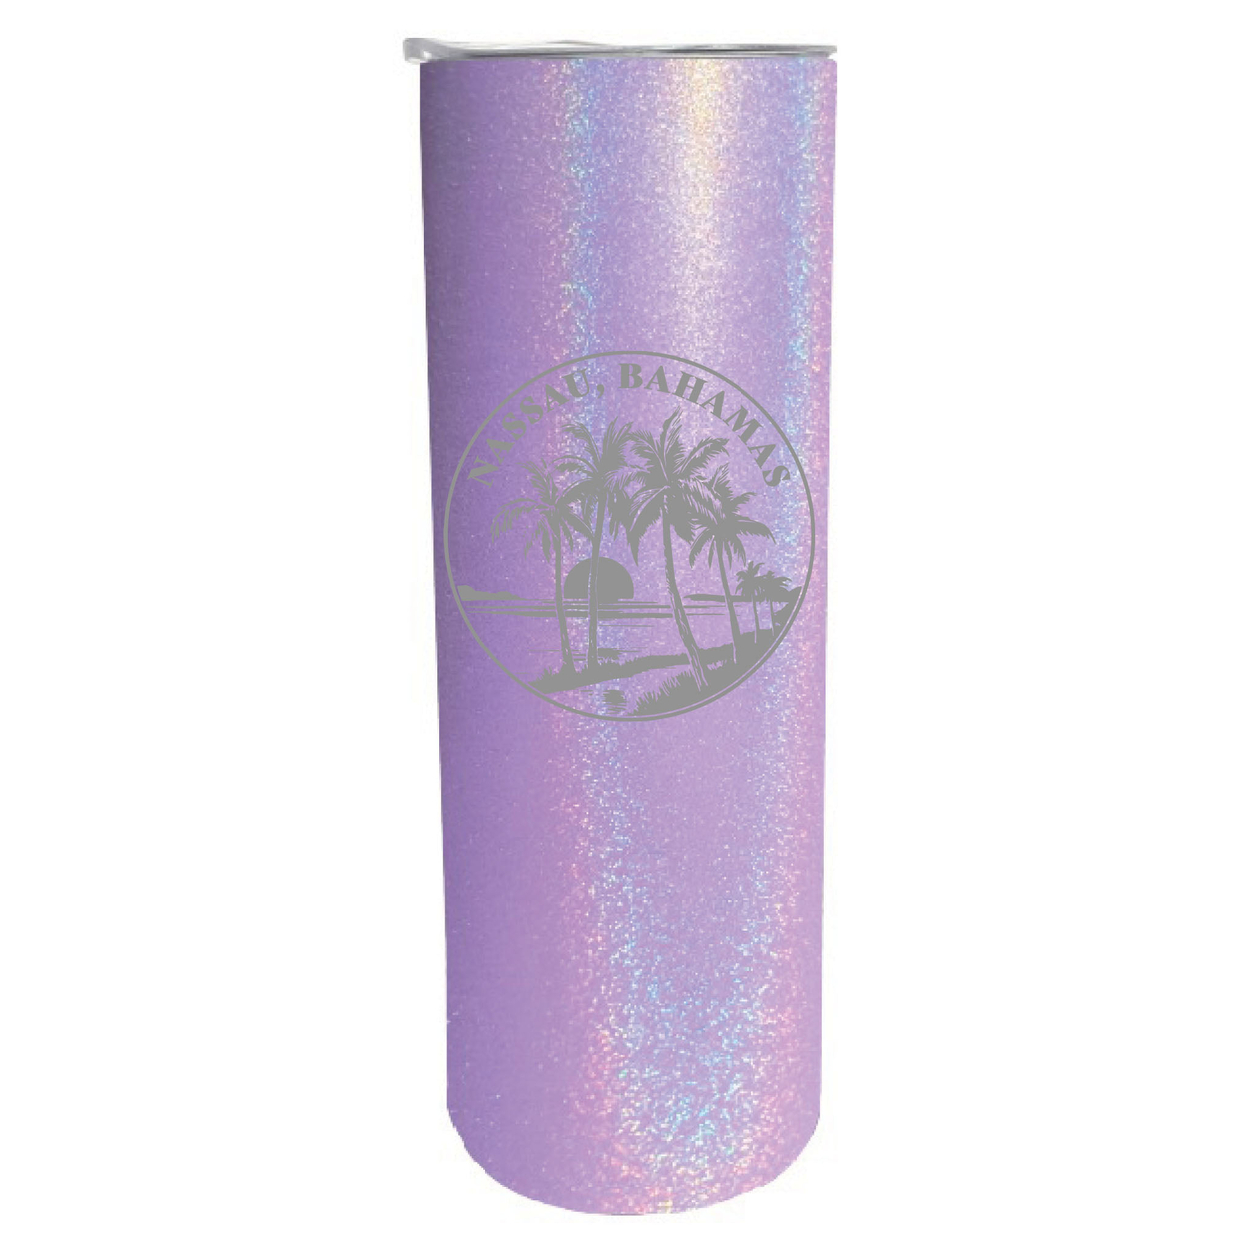 Nassau The Bahamas Souvenir 20 Oz Engraved Insulated Stainless Steel Skinny Tumbler - Seafoam,,4-Pack